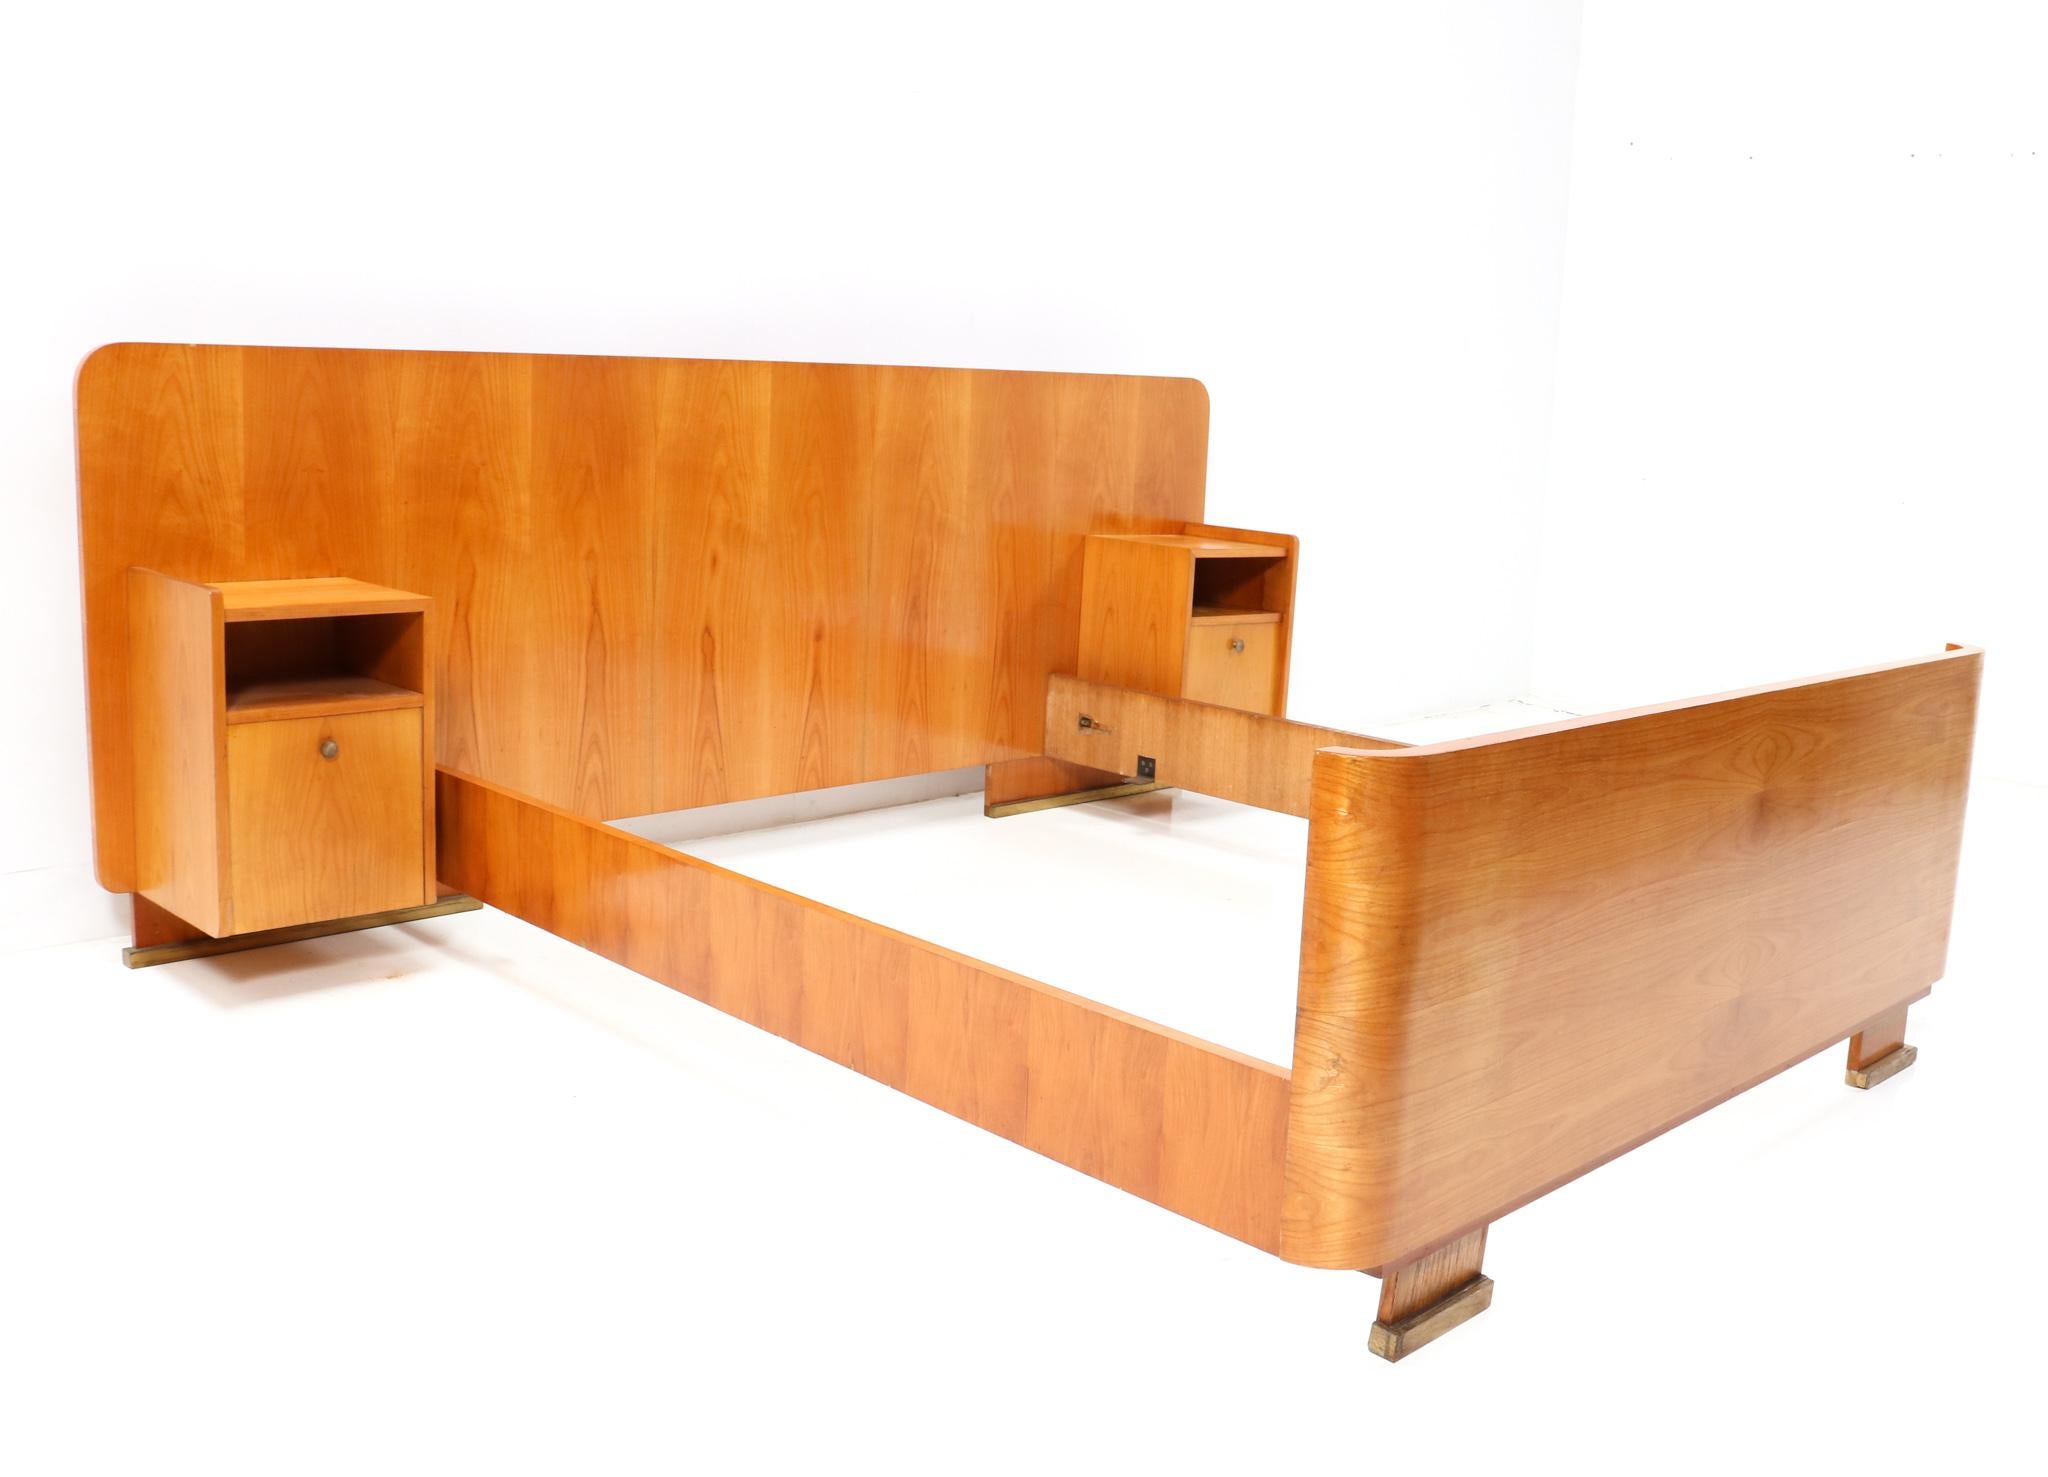 Magnificent and rare Art Deco bed frame with two original integrated nightstands or bedside tables.
Design by De Coene Frères Kortrijk.
Striking Belgium design from the 1930s.
Solid cherry and original cherry veneer with brass feet.
This